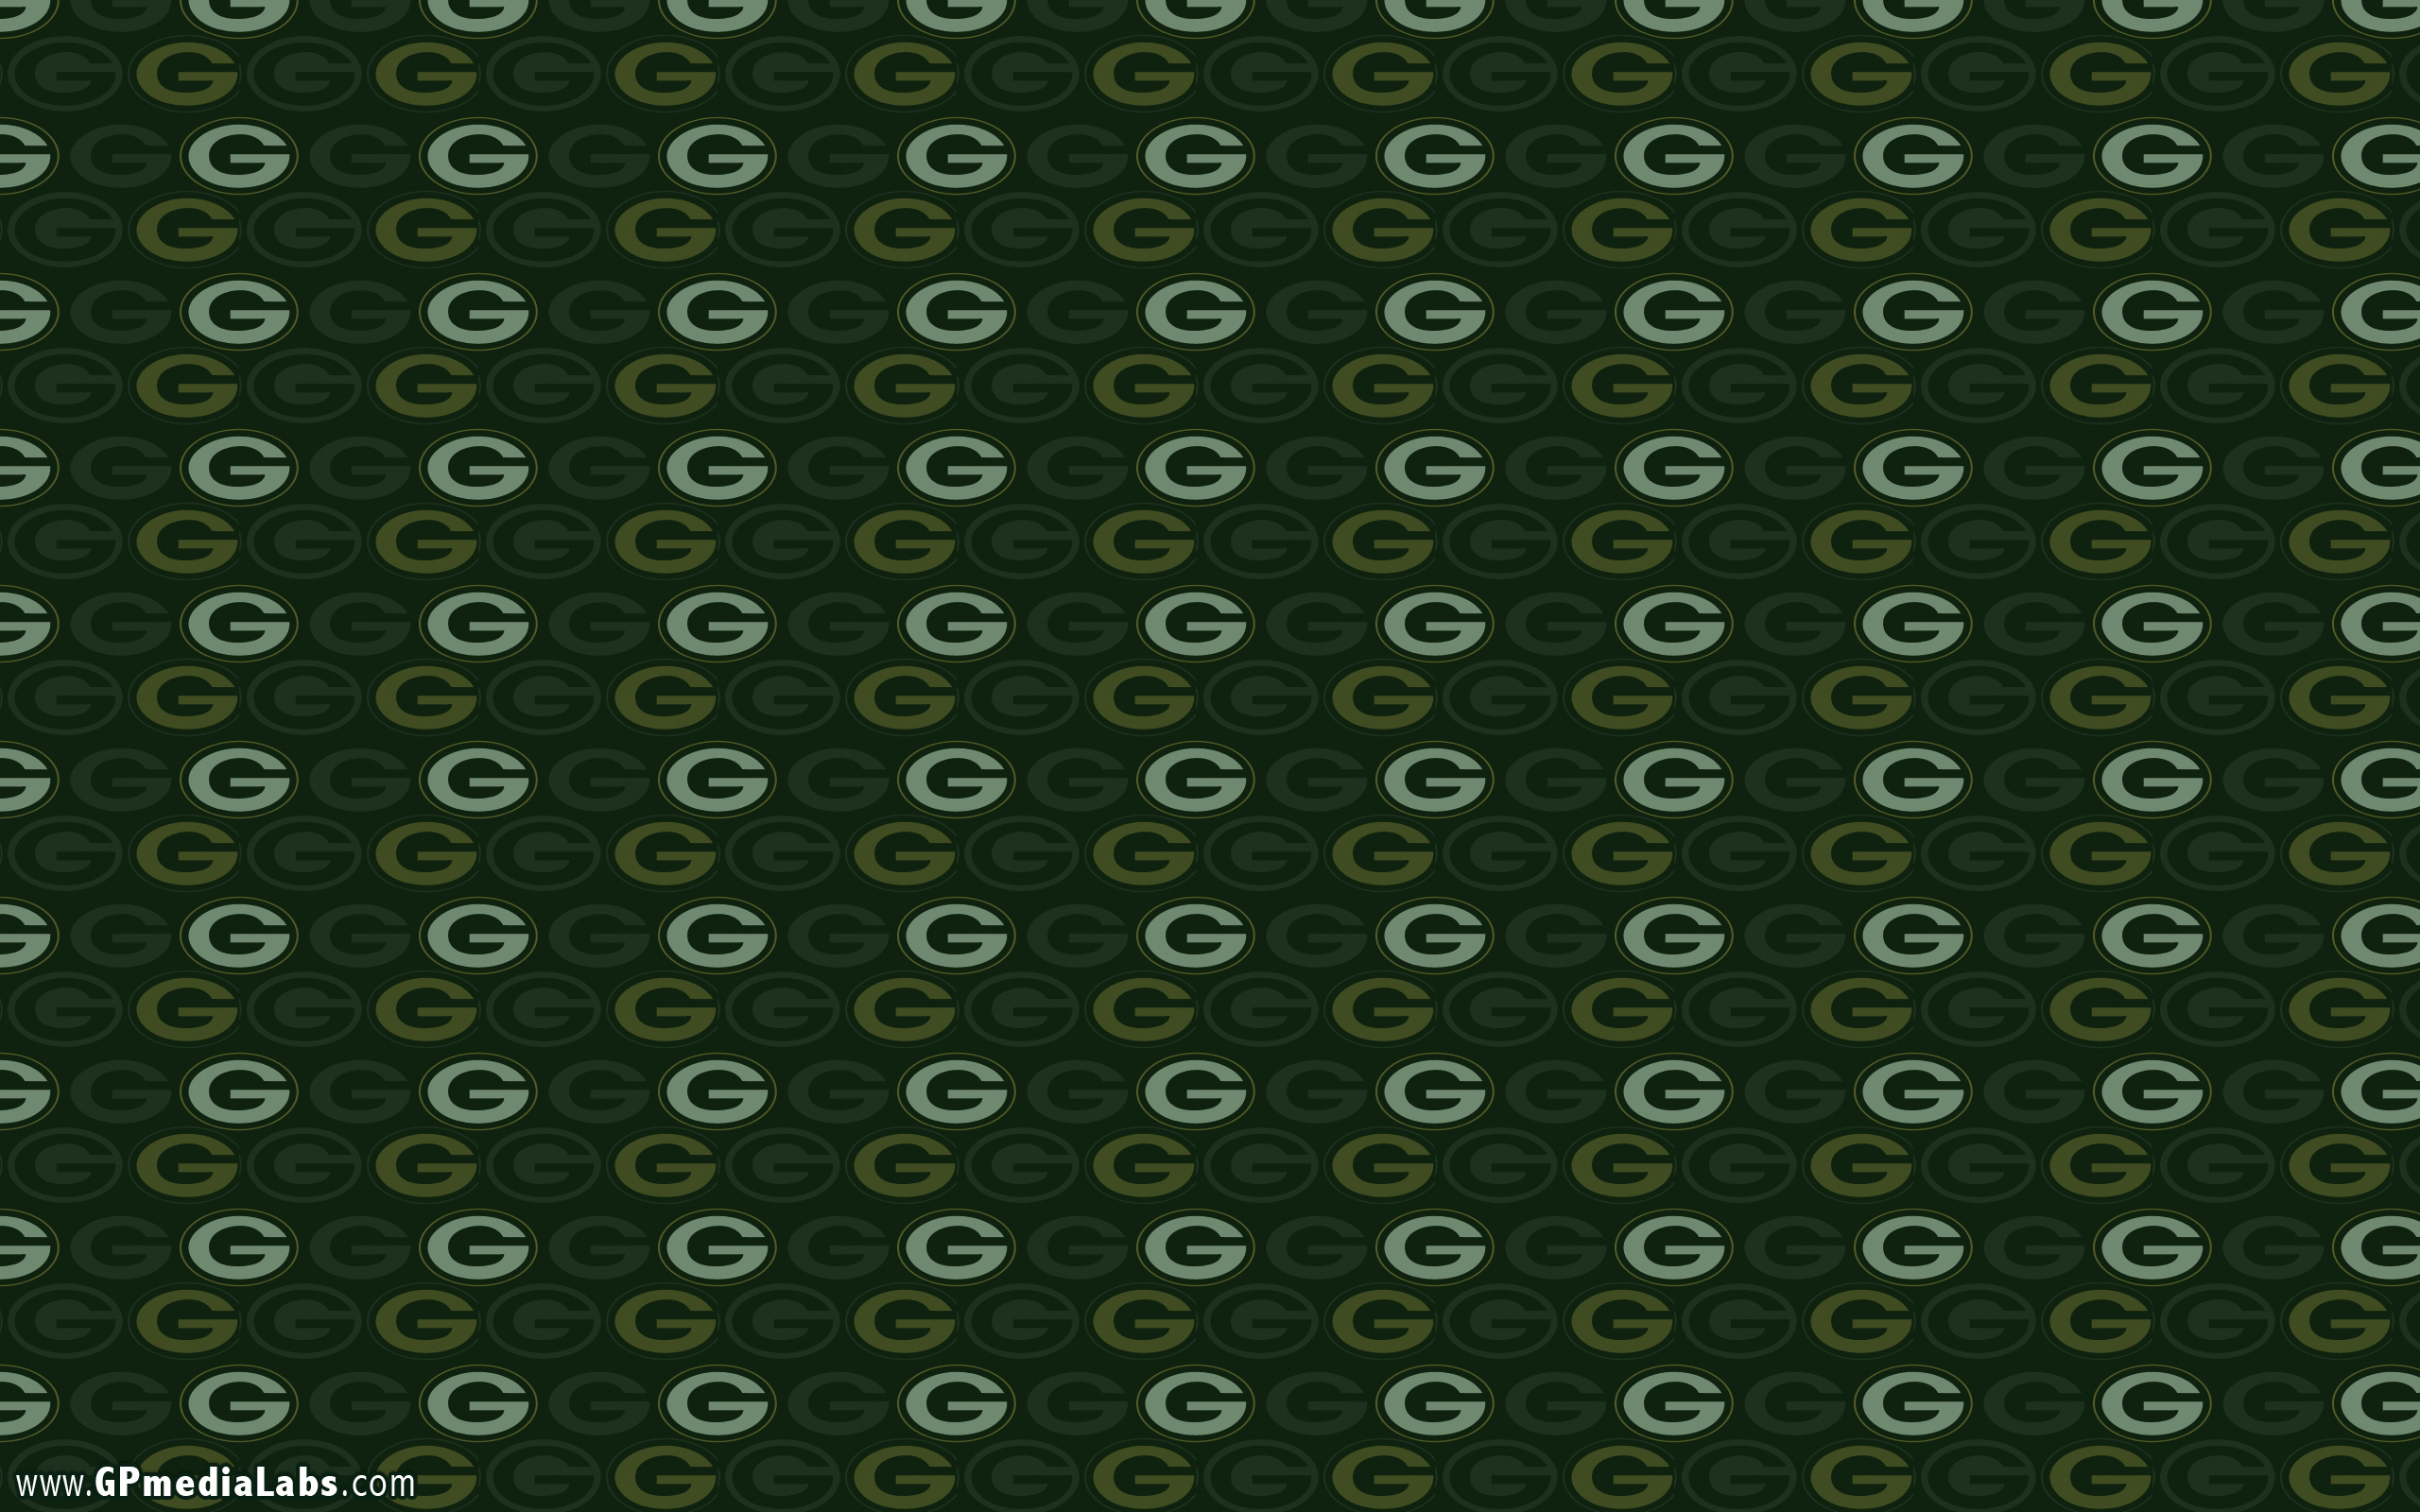 More Green Bay Packers Wallpaper